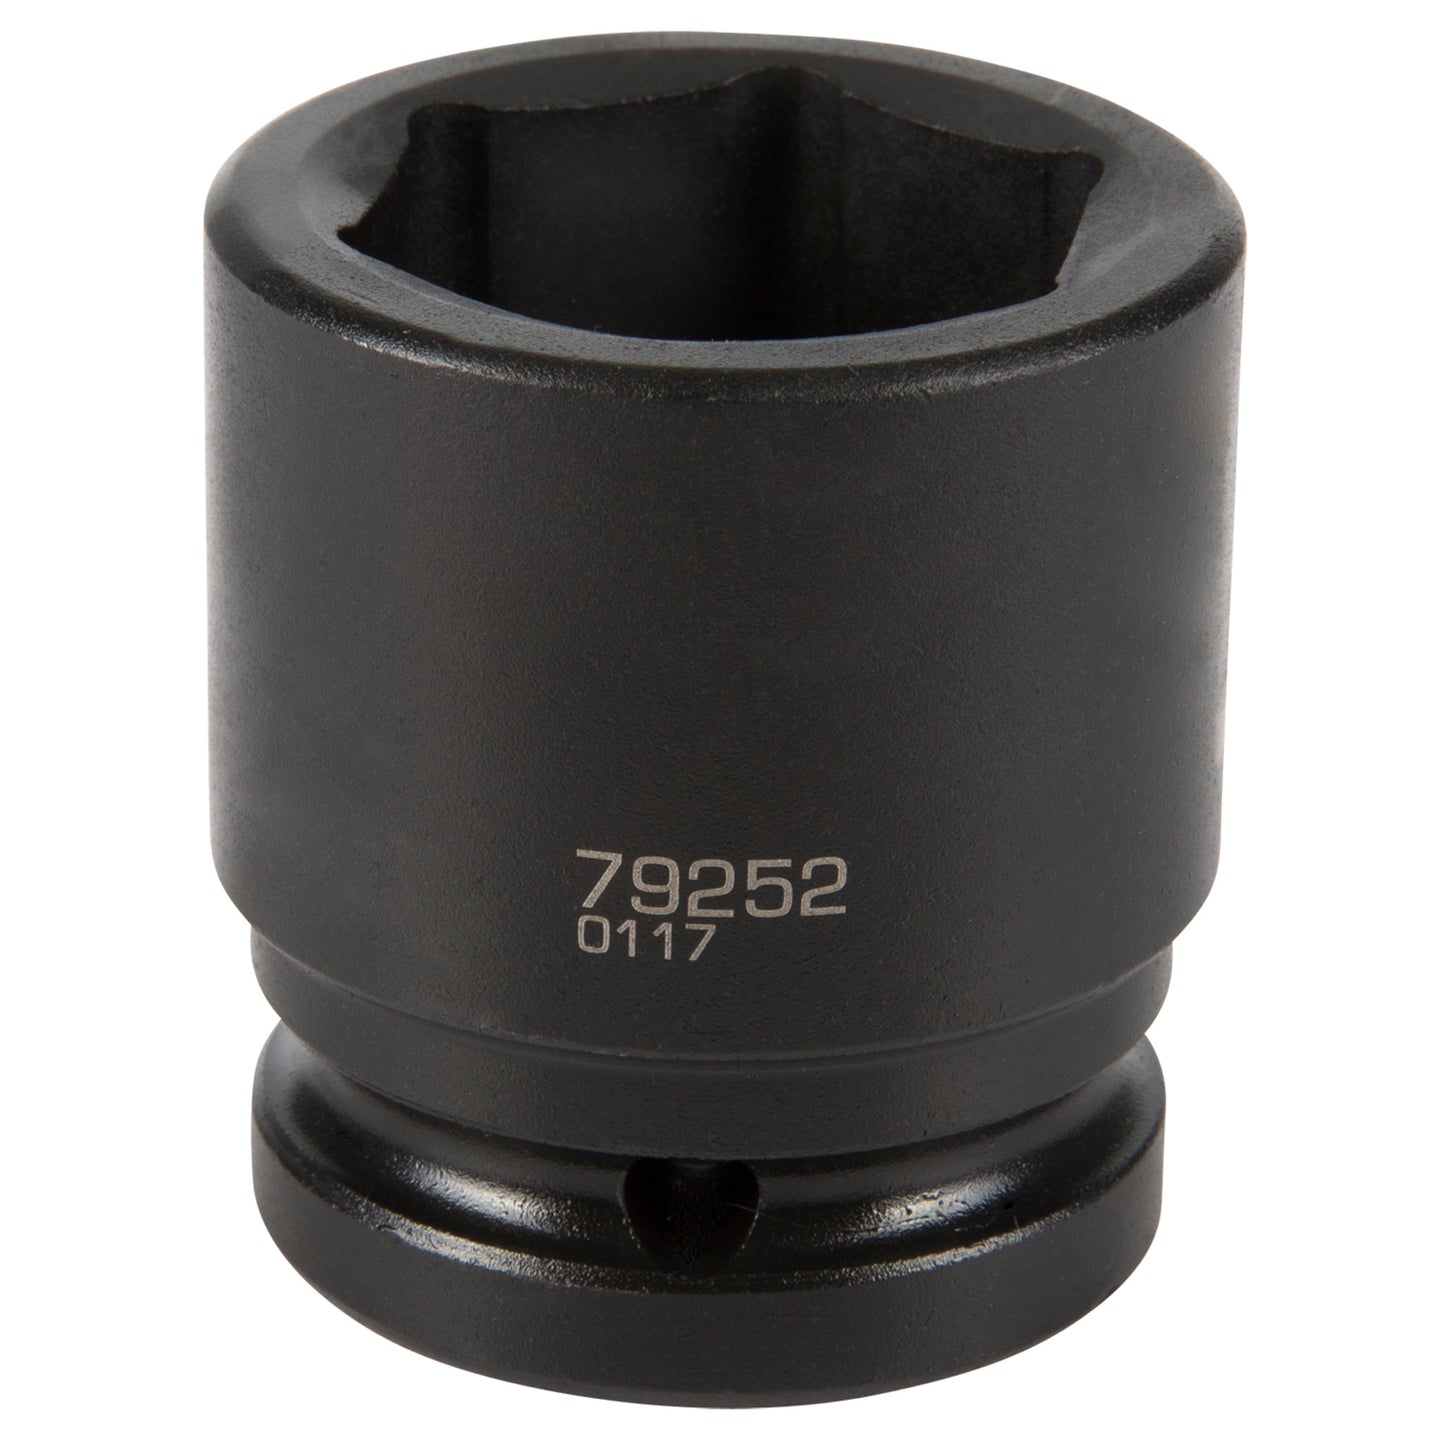 3/4-Inch Drive 6-Point 32mm Impact Socket